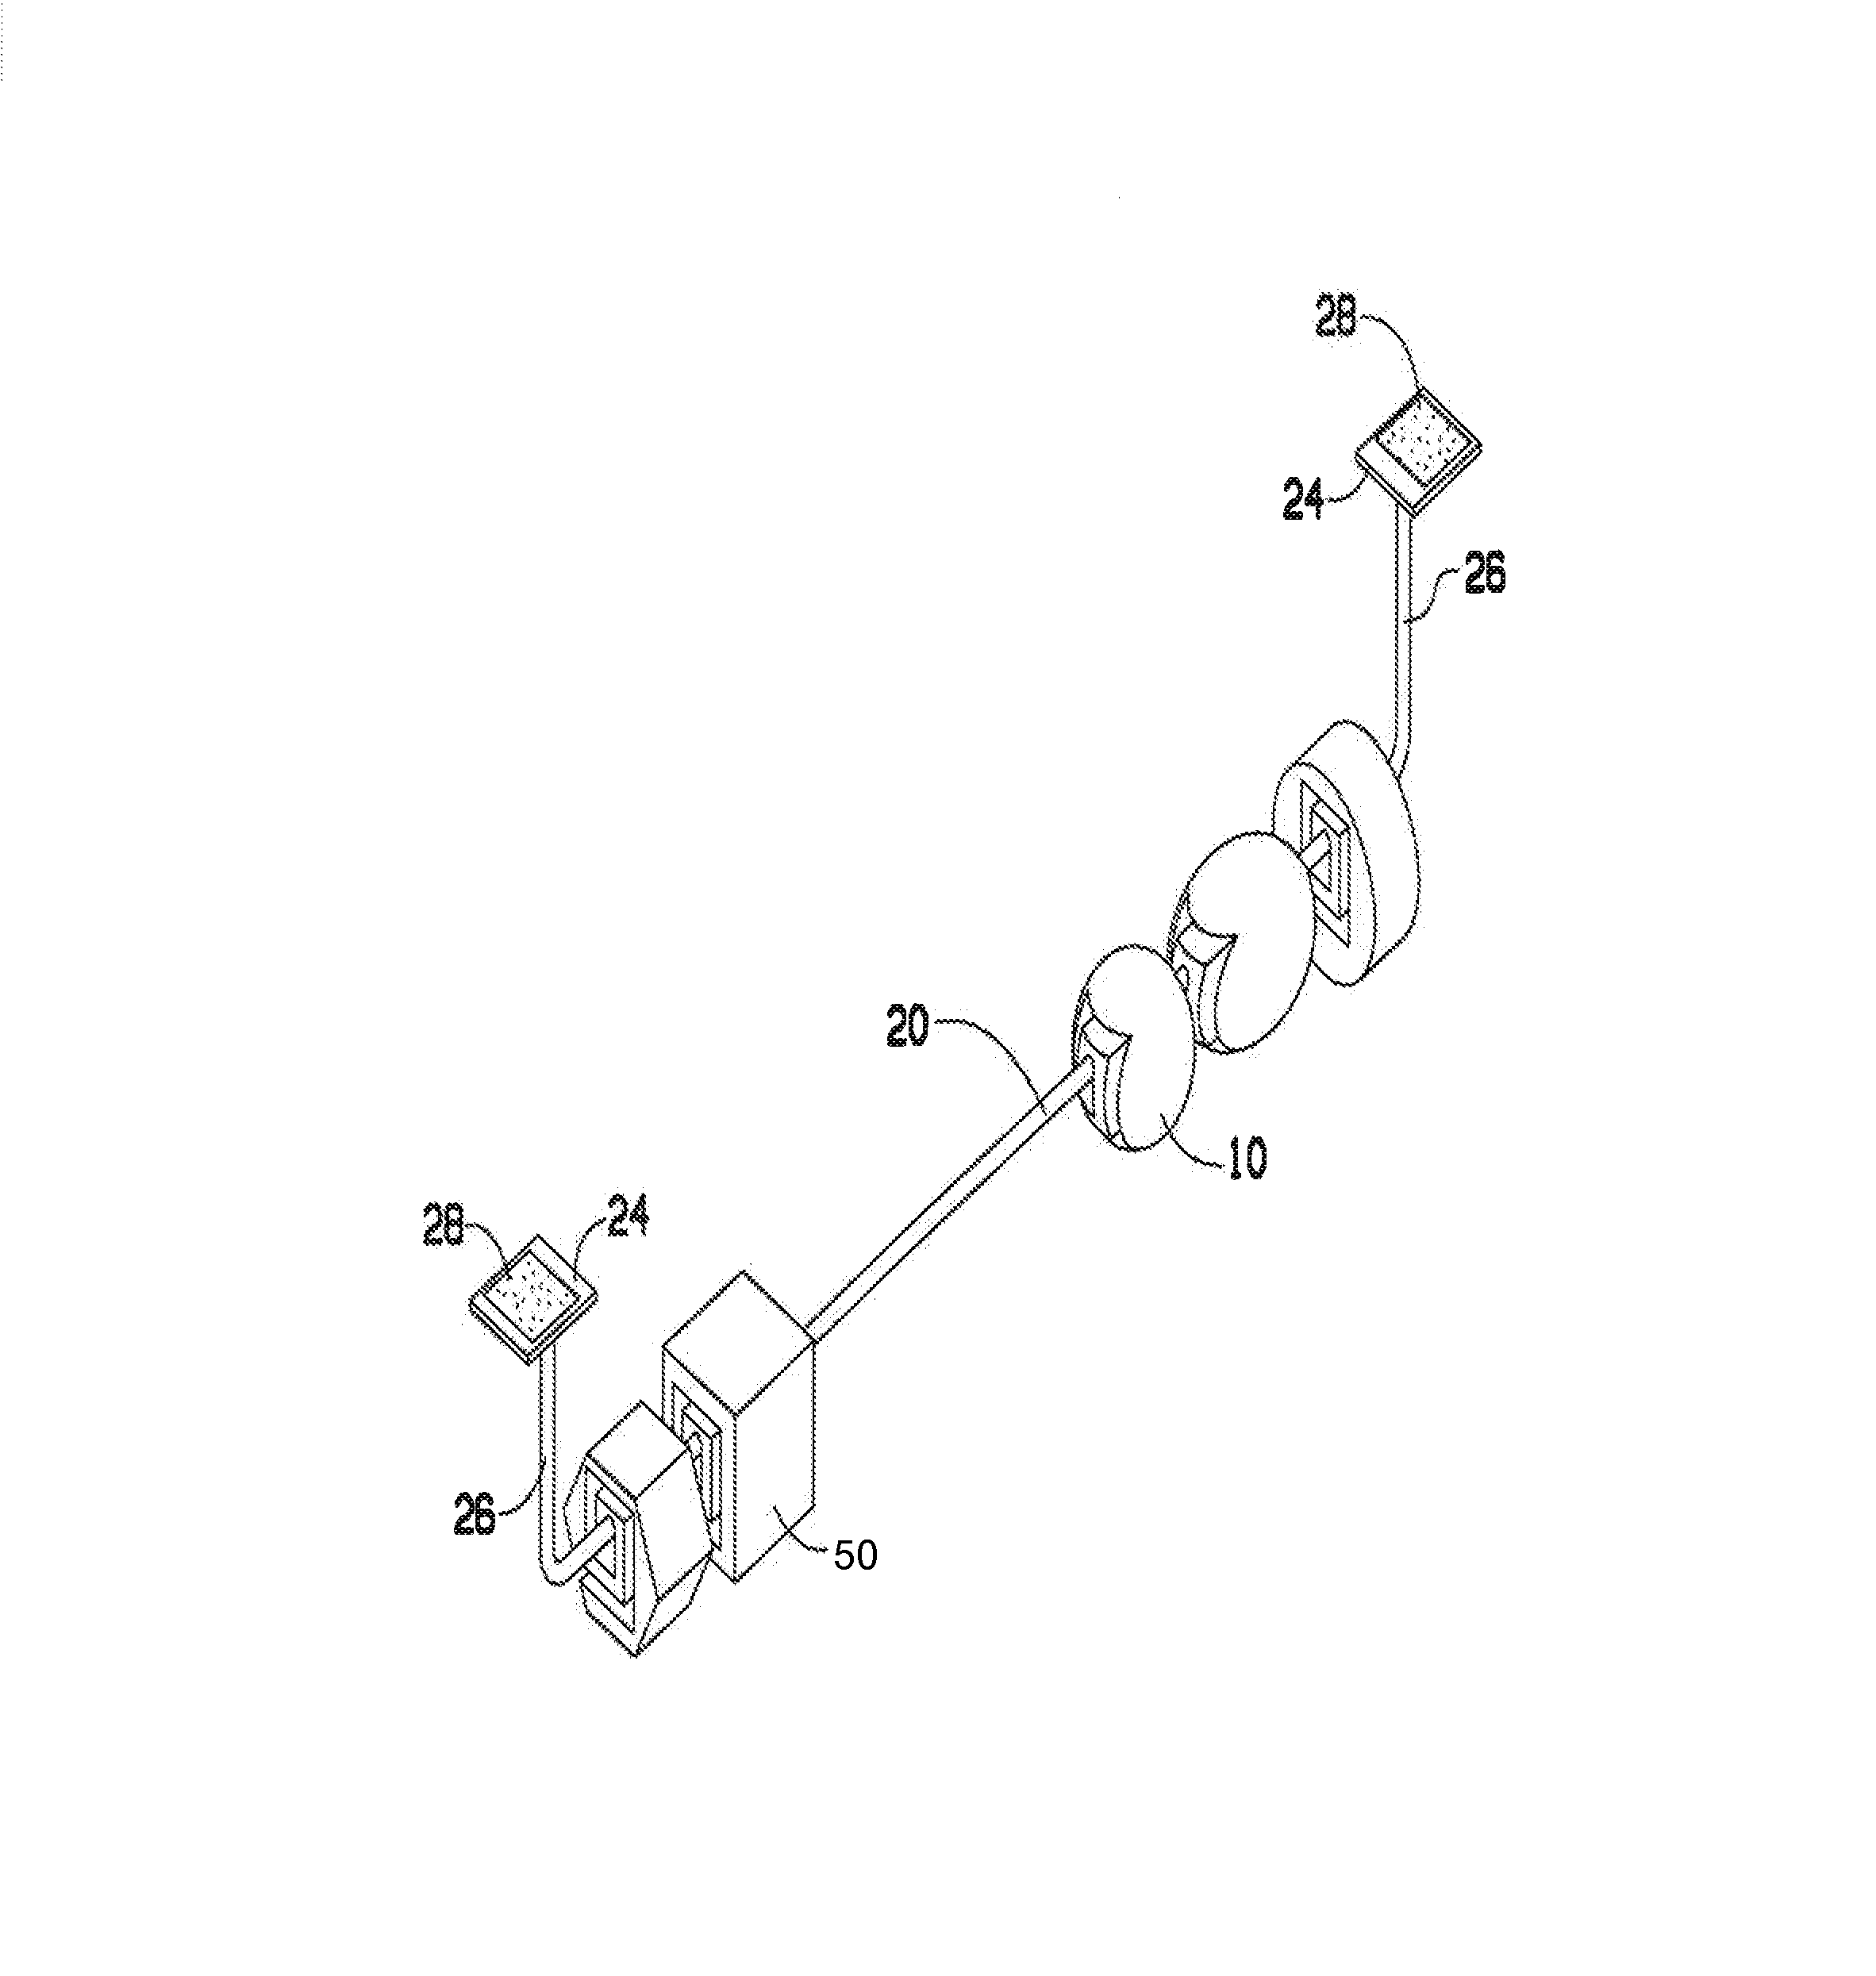 Method and apparatus for placing one object around another object, device for holding objects and software application related to the same